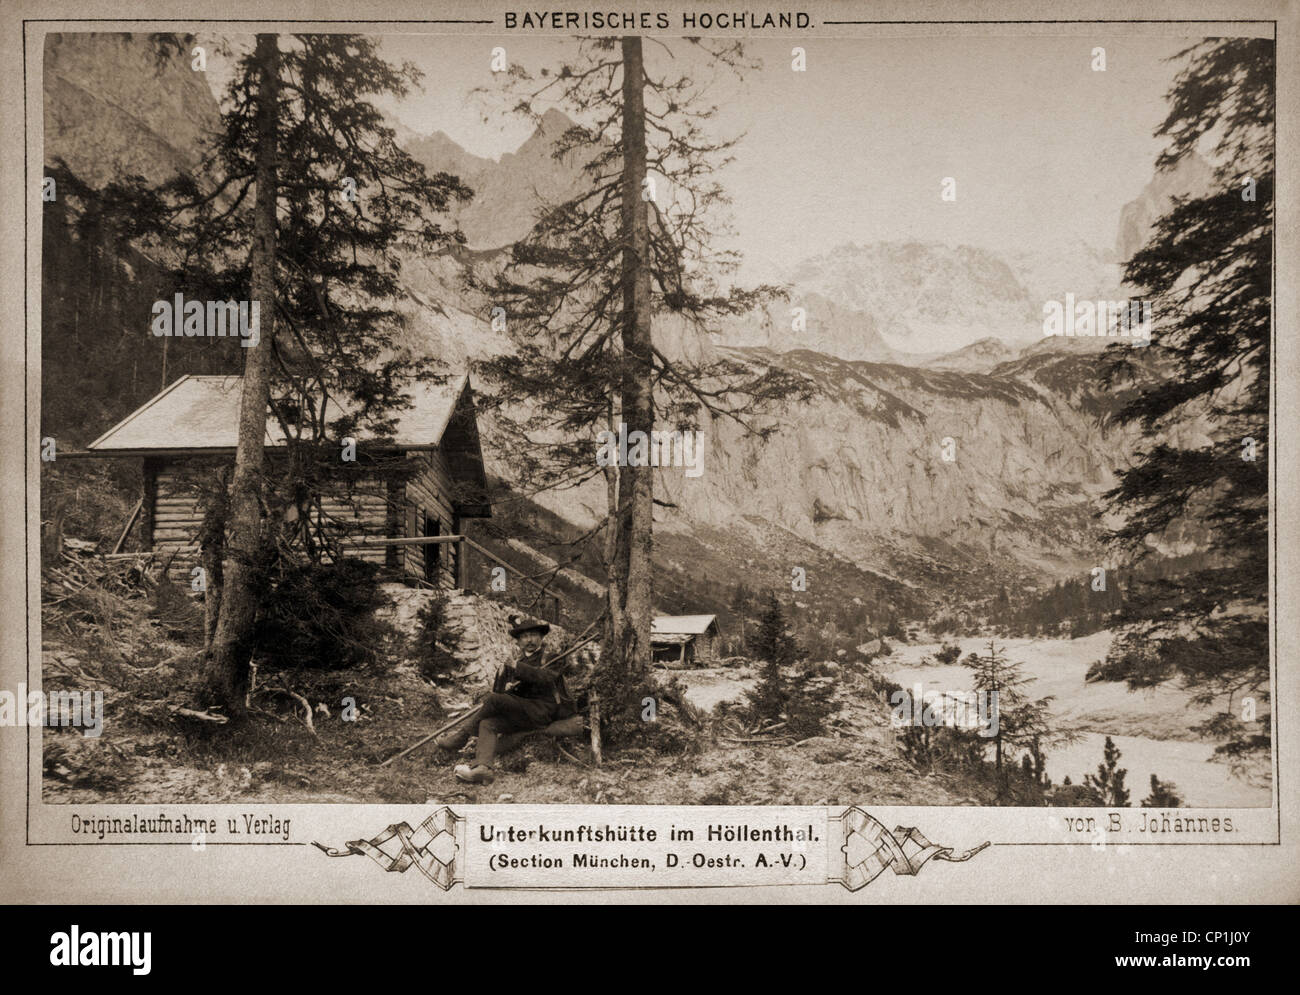 geography / travel, Germany, landscapes, Upper Bavaria, Hoellental (Hell Valley), Wetterstein mountains, mountain cabin of the German and Austrian Alpine Club, view, cabinet card by  B. Johannes, Partenkirchen, circa 1890, Additional-Rights-Clearences-Not Available Stock Photo